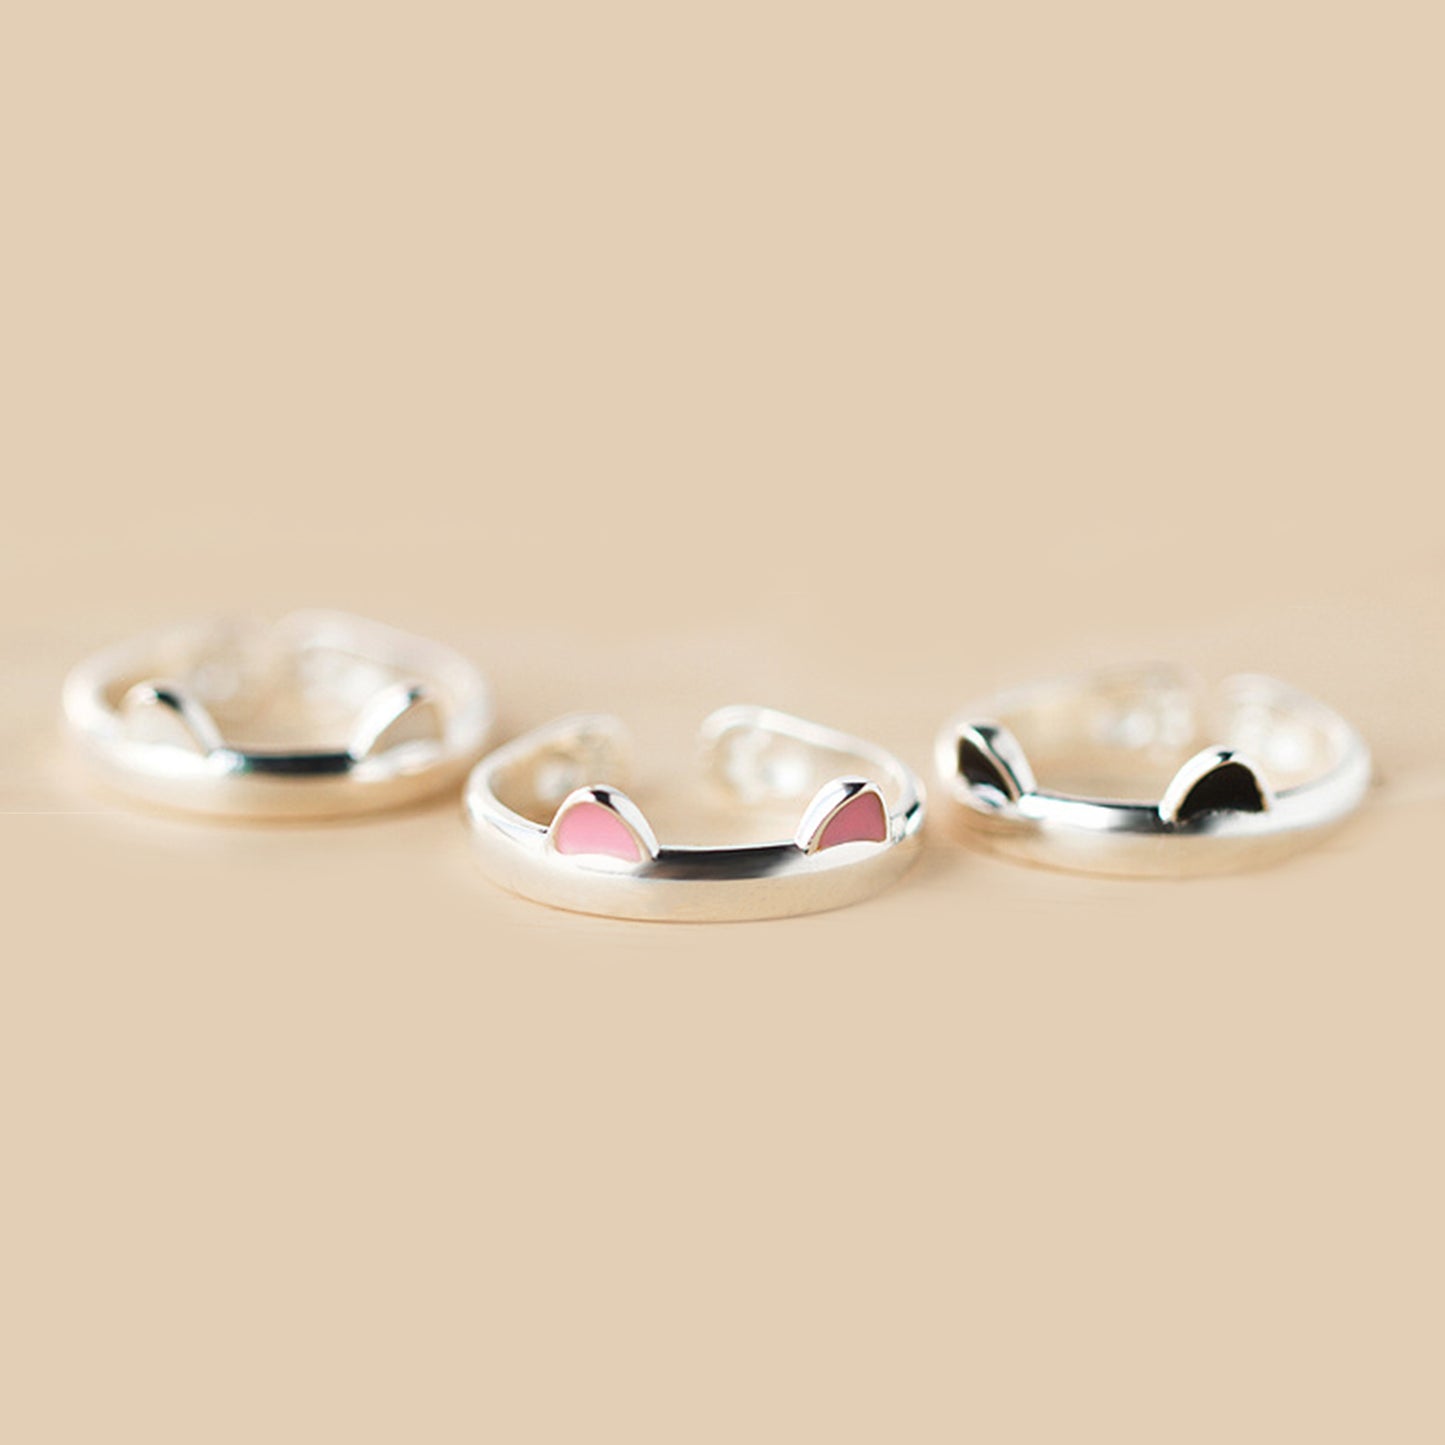 925 Sterling Silver Cat Ear Ring with Pink and Black Glazed Kitten Paw Hug